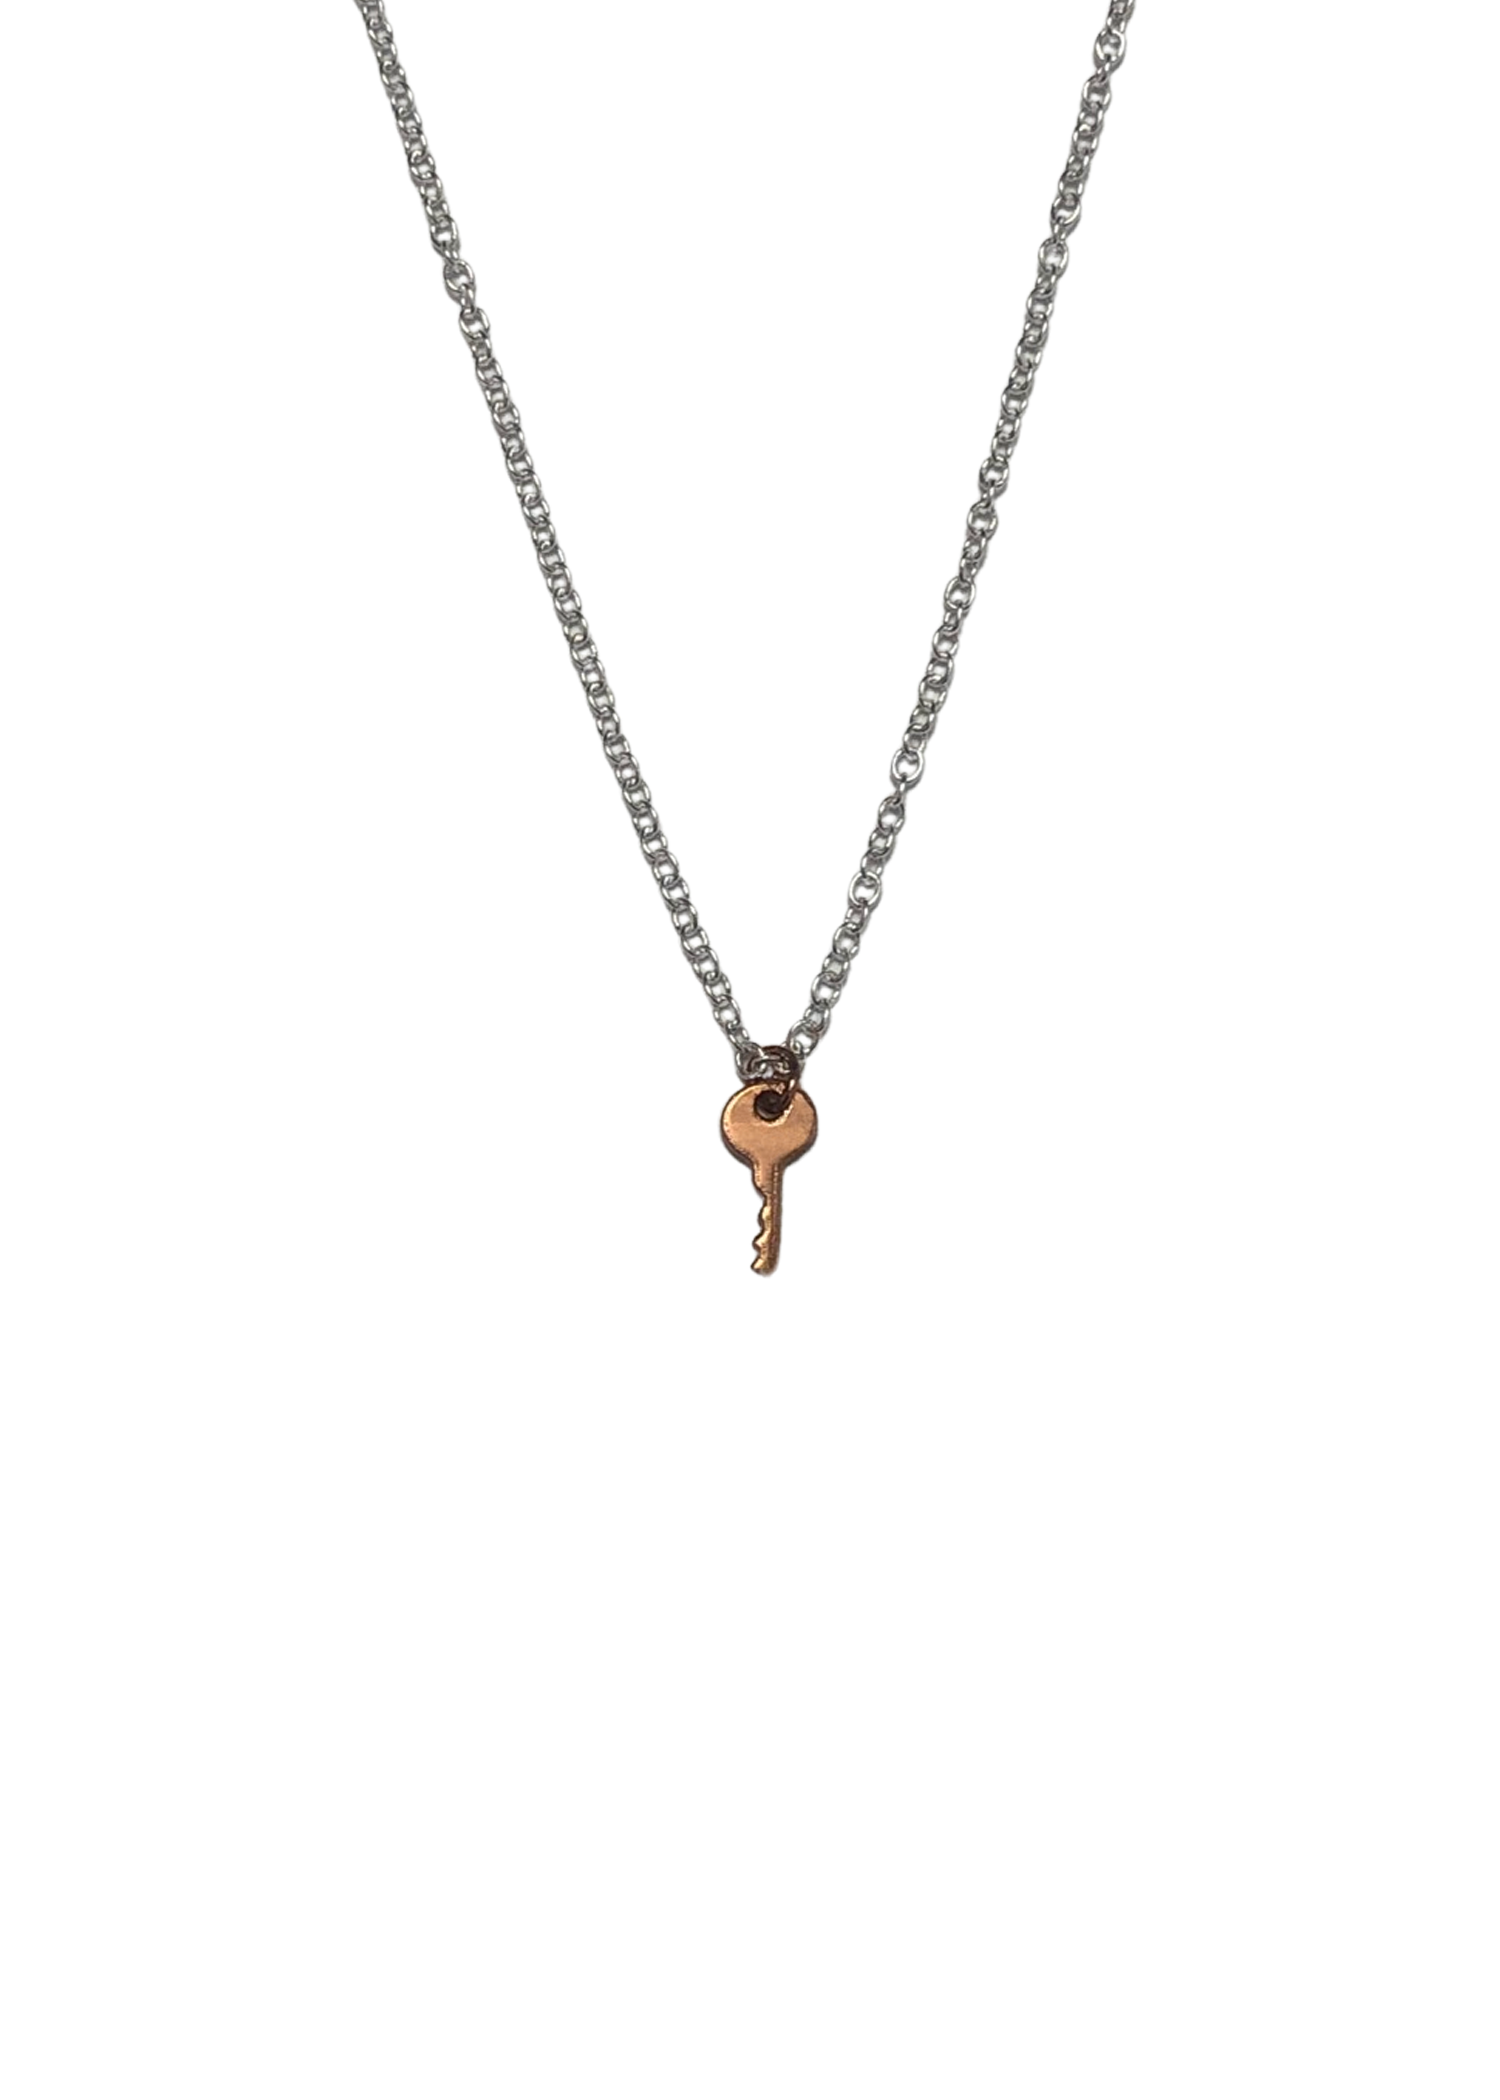 Key Charm Necklace - .925 Sterling Silver / Rose Vermeil